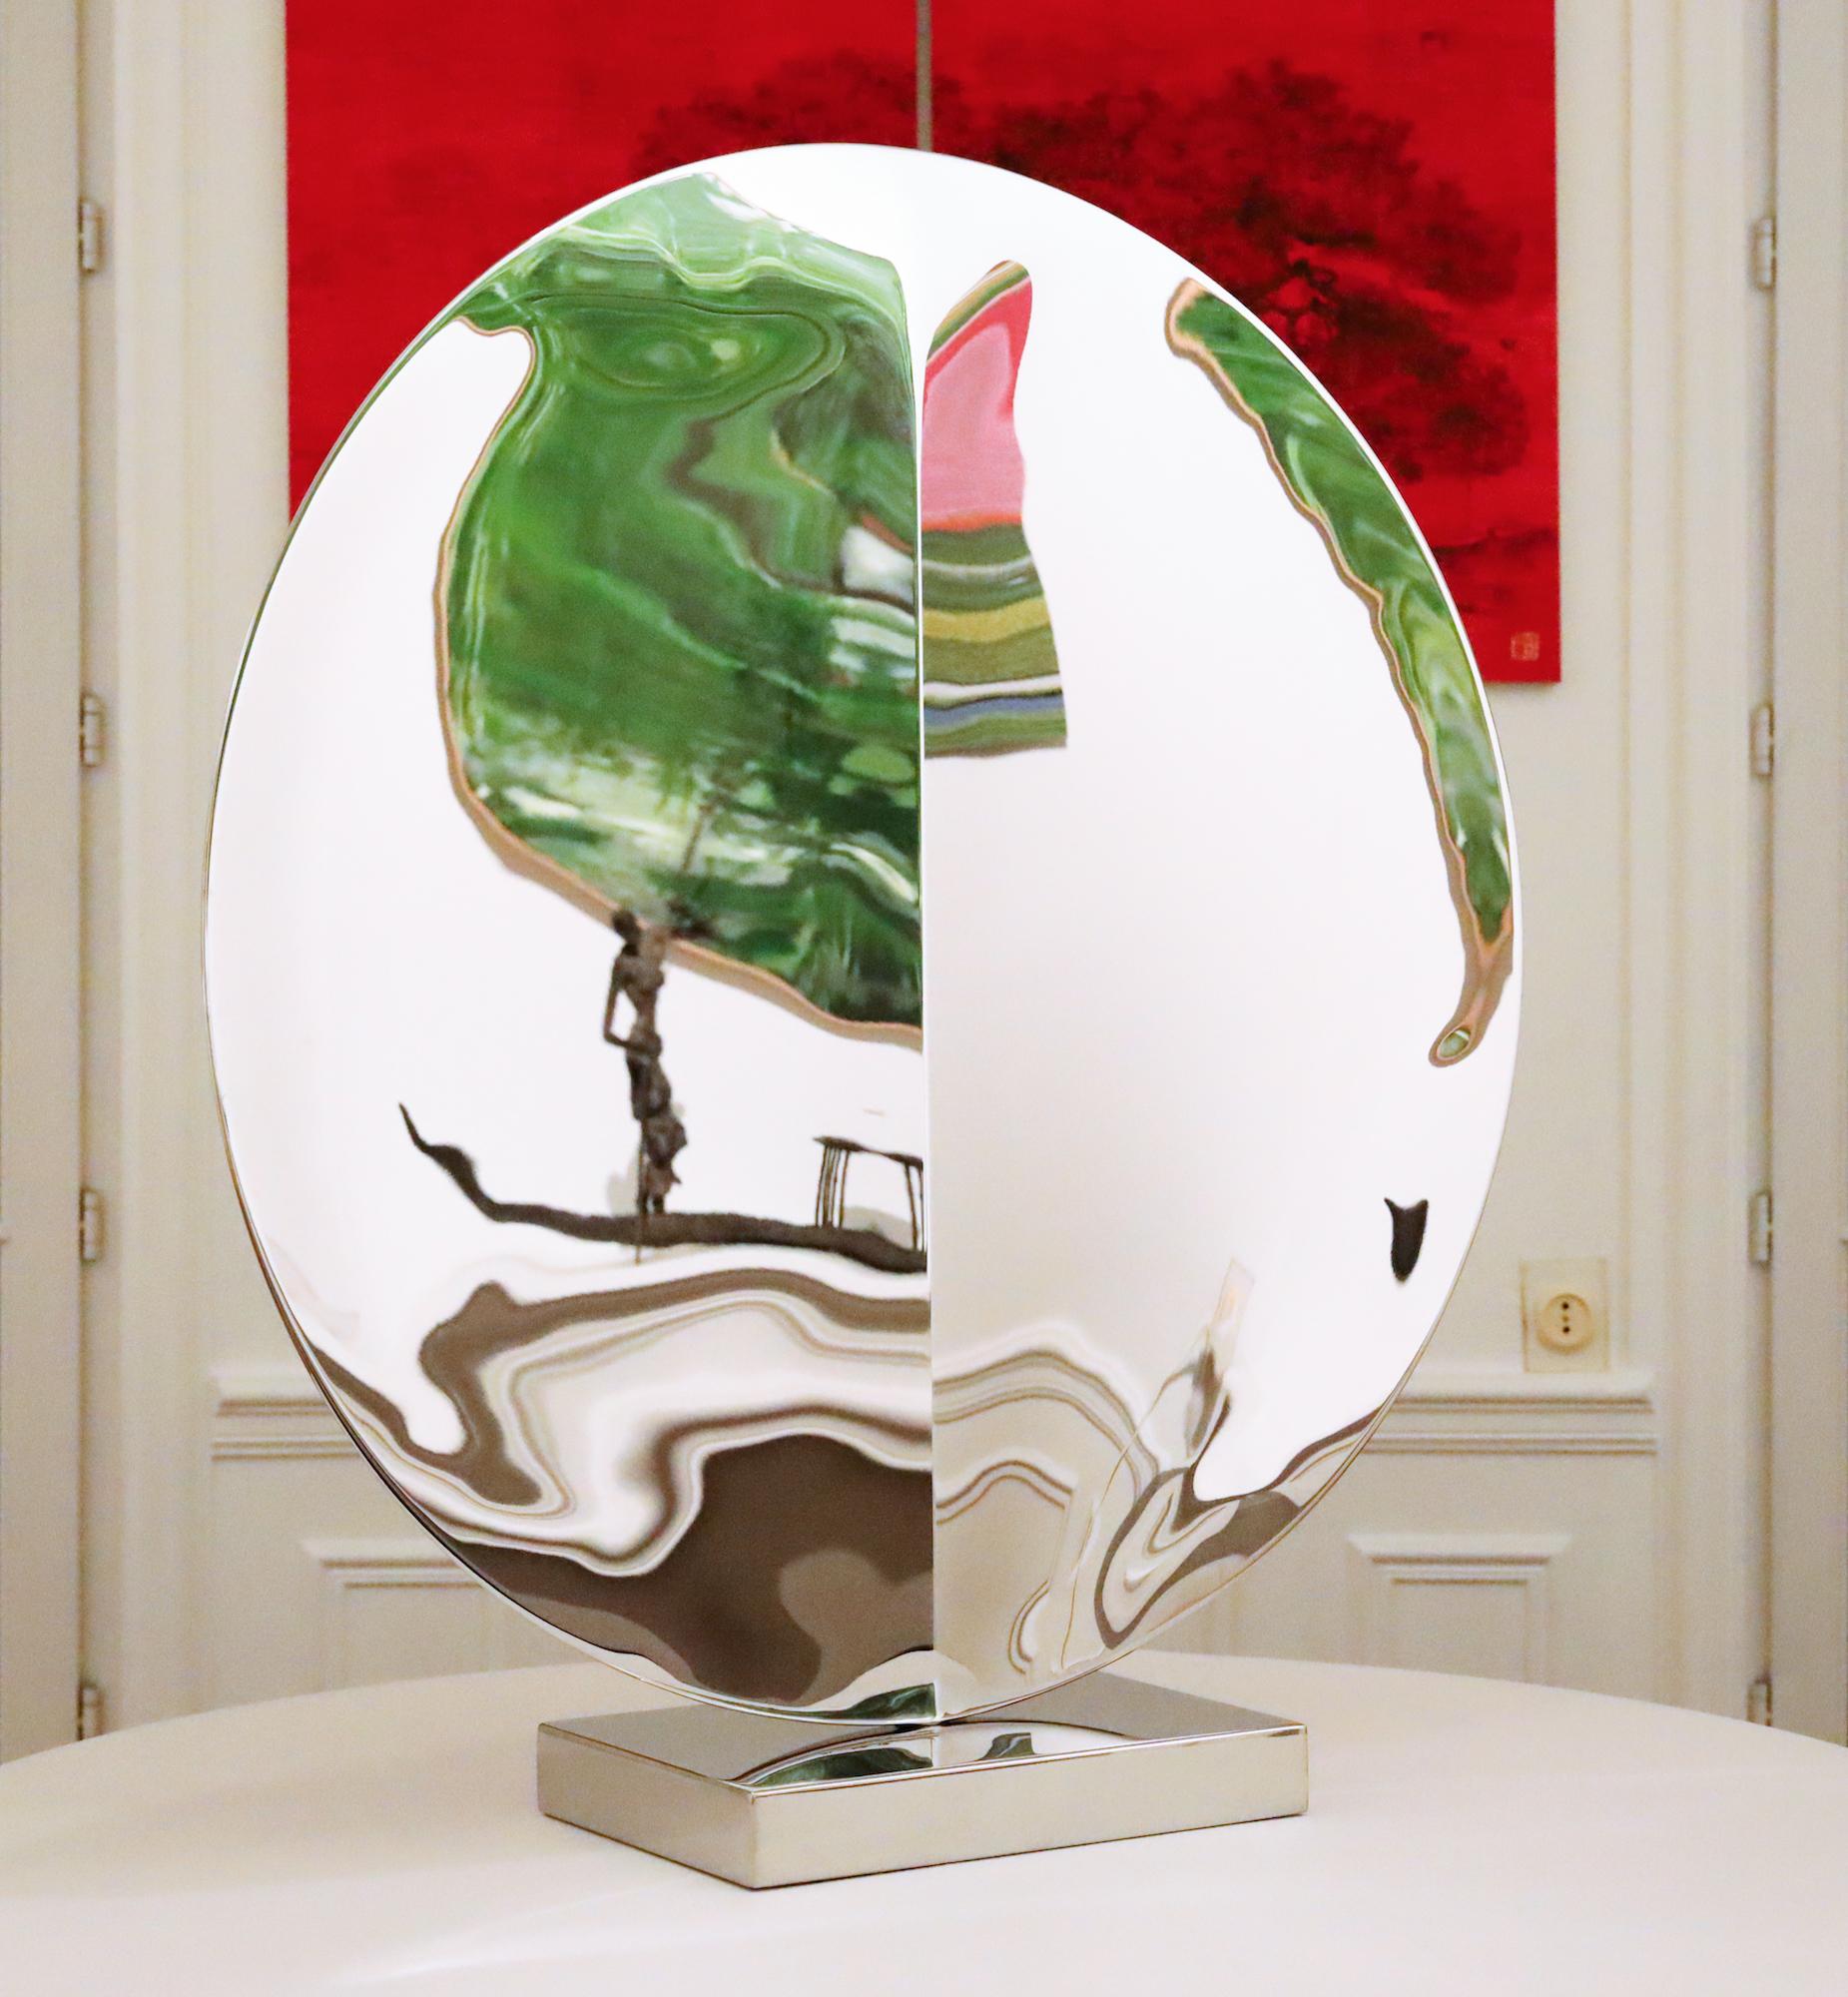 Mirror “with fold” I by Franck K - Stainless steel sculpture, reflection, light For Sale 4